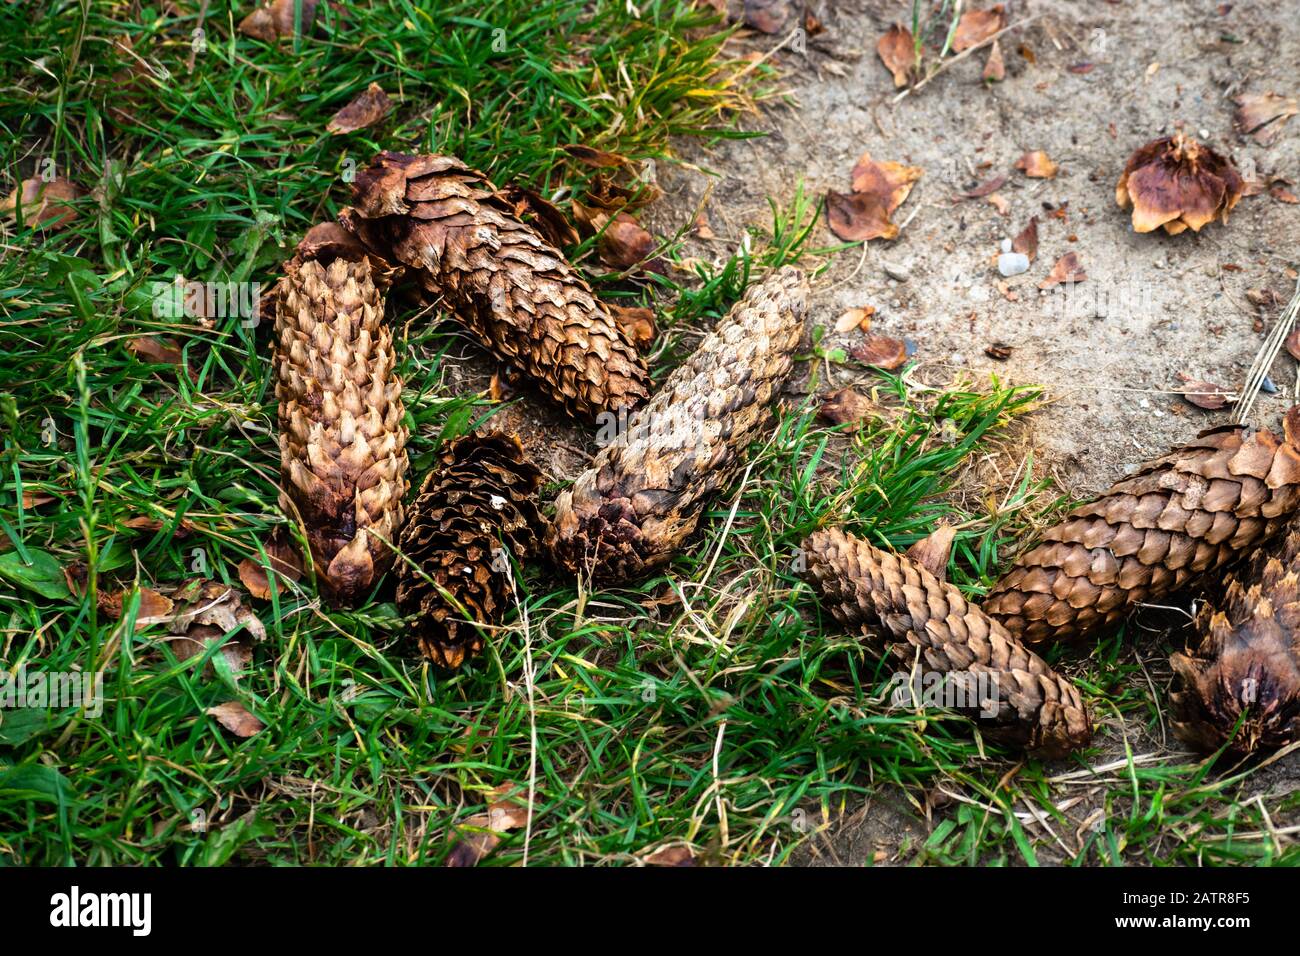 Some fir / pine cones lying on the ground. Stock Photo